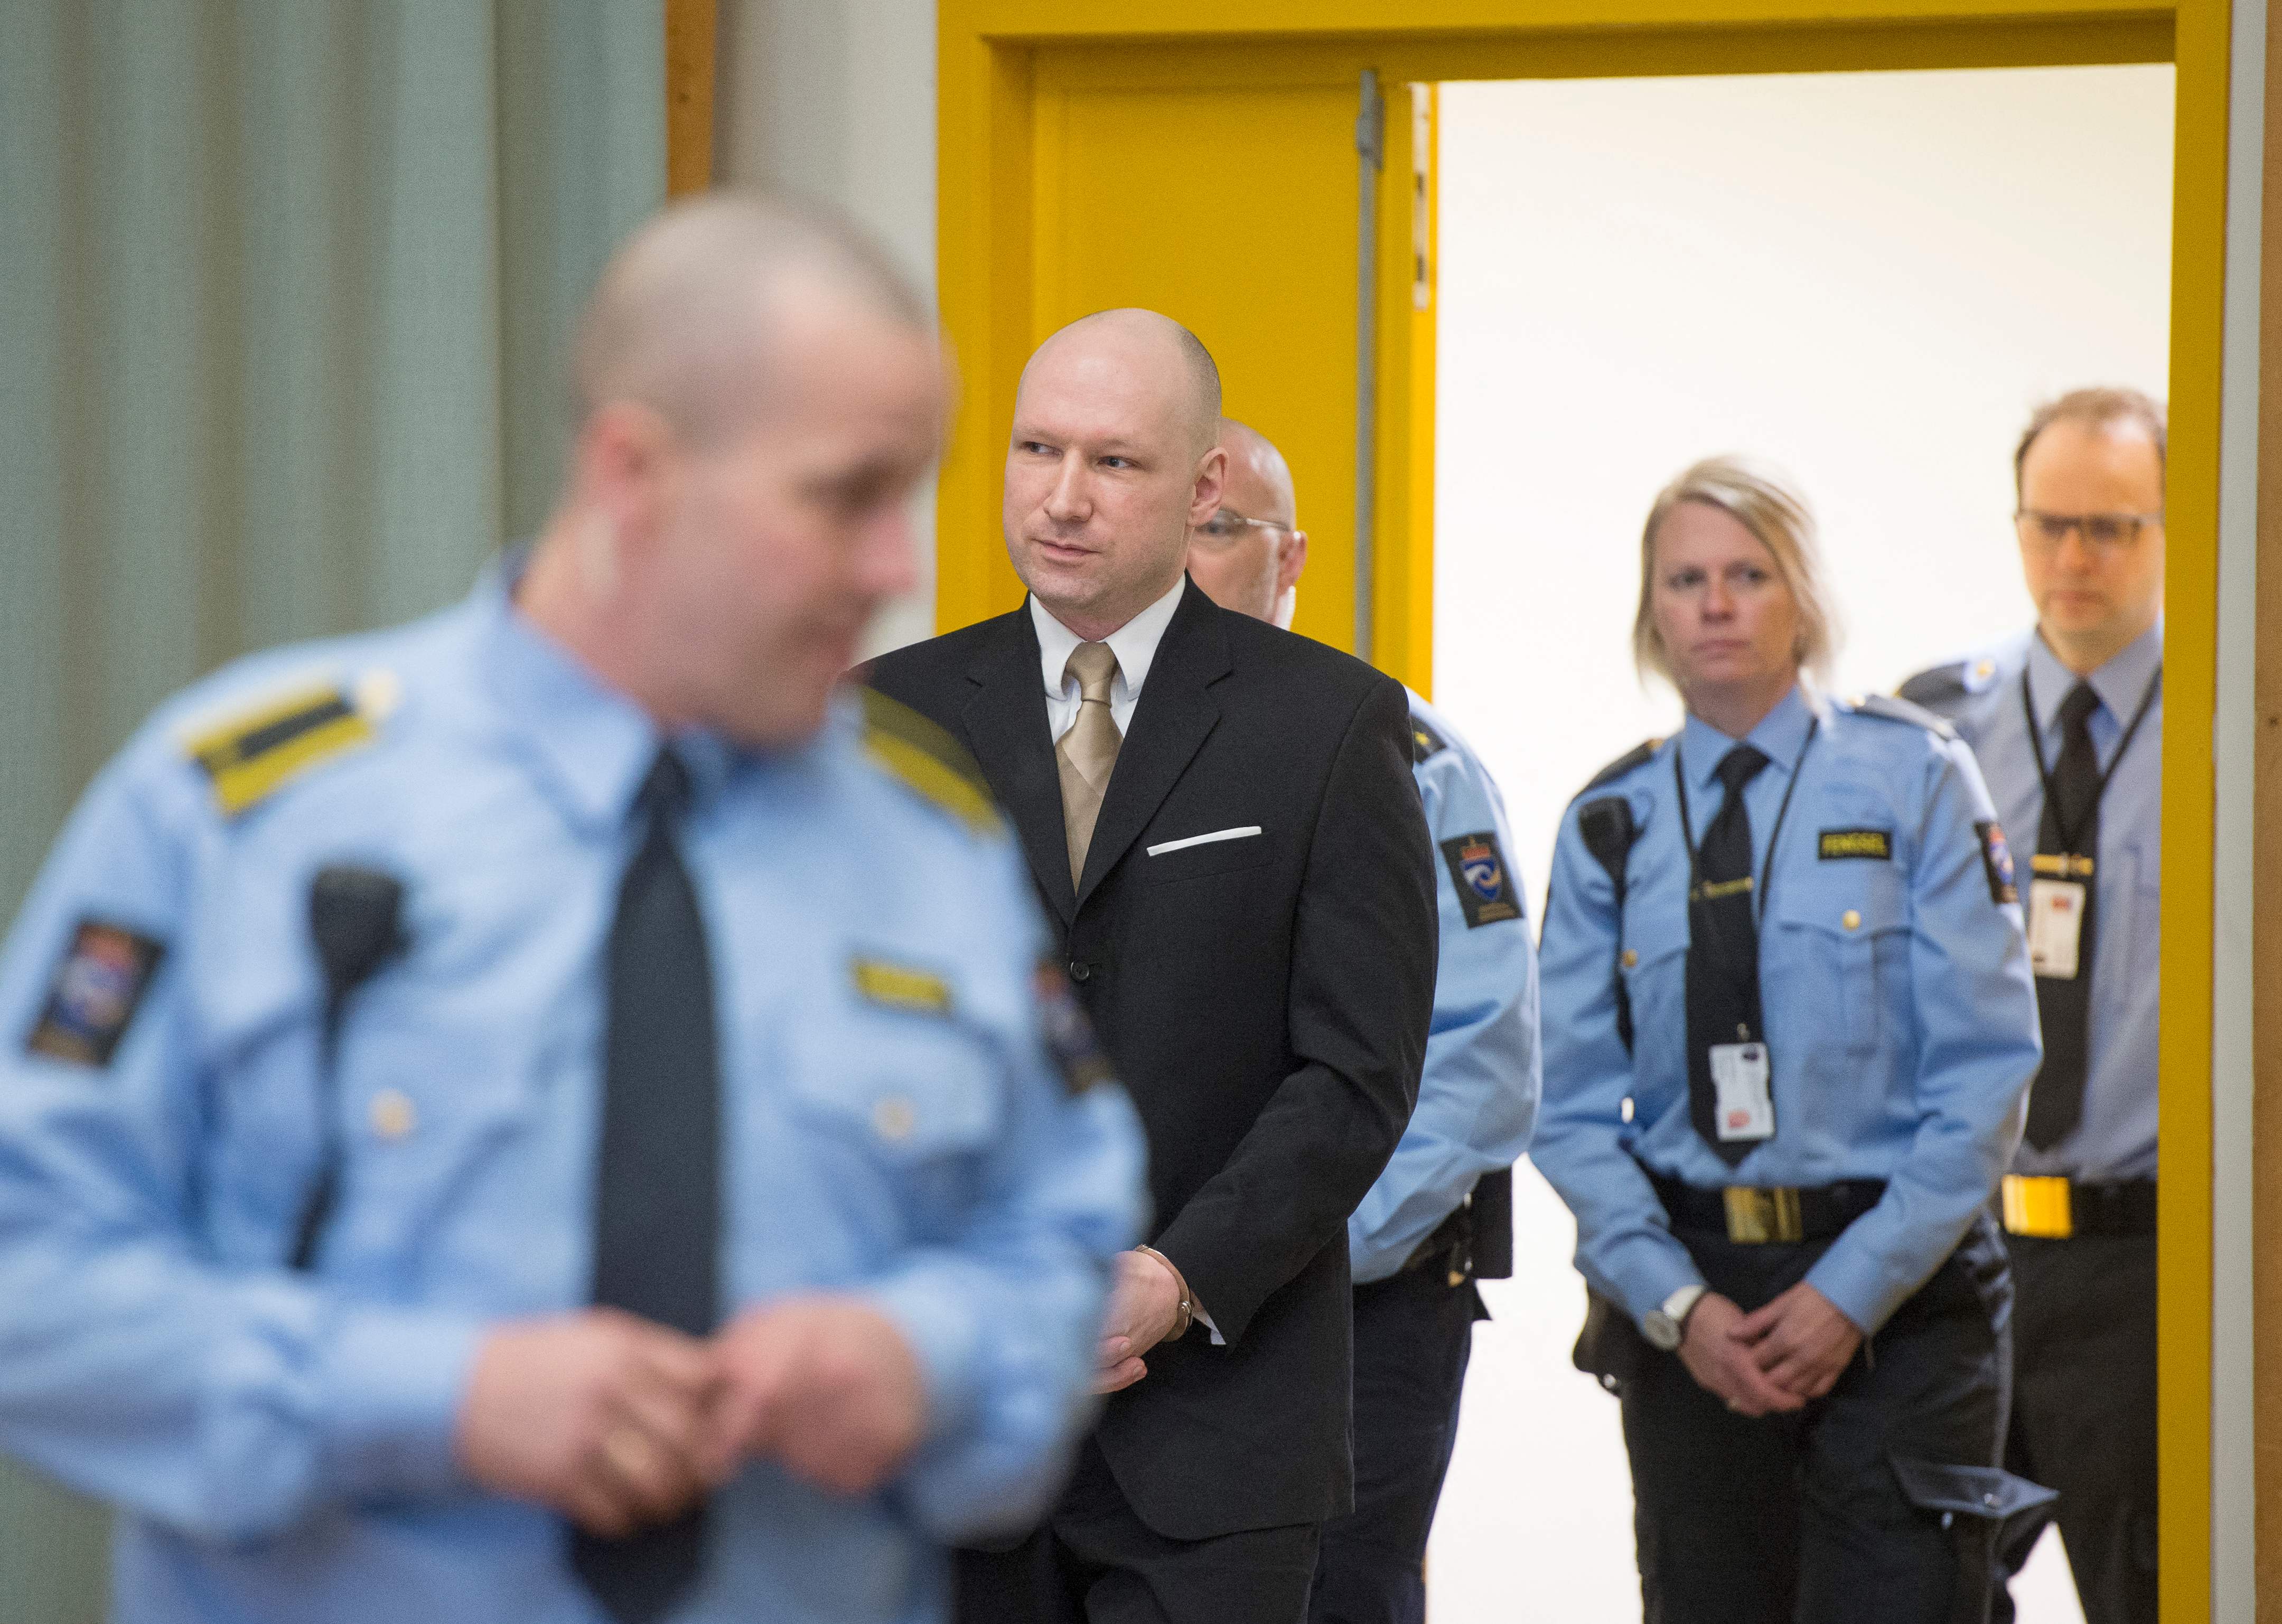 Anders Behring Breivik enters a makeshift court in Skien prisons gym on 15 March 2016